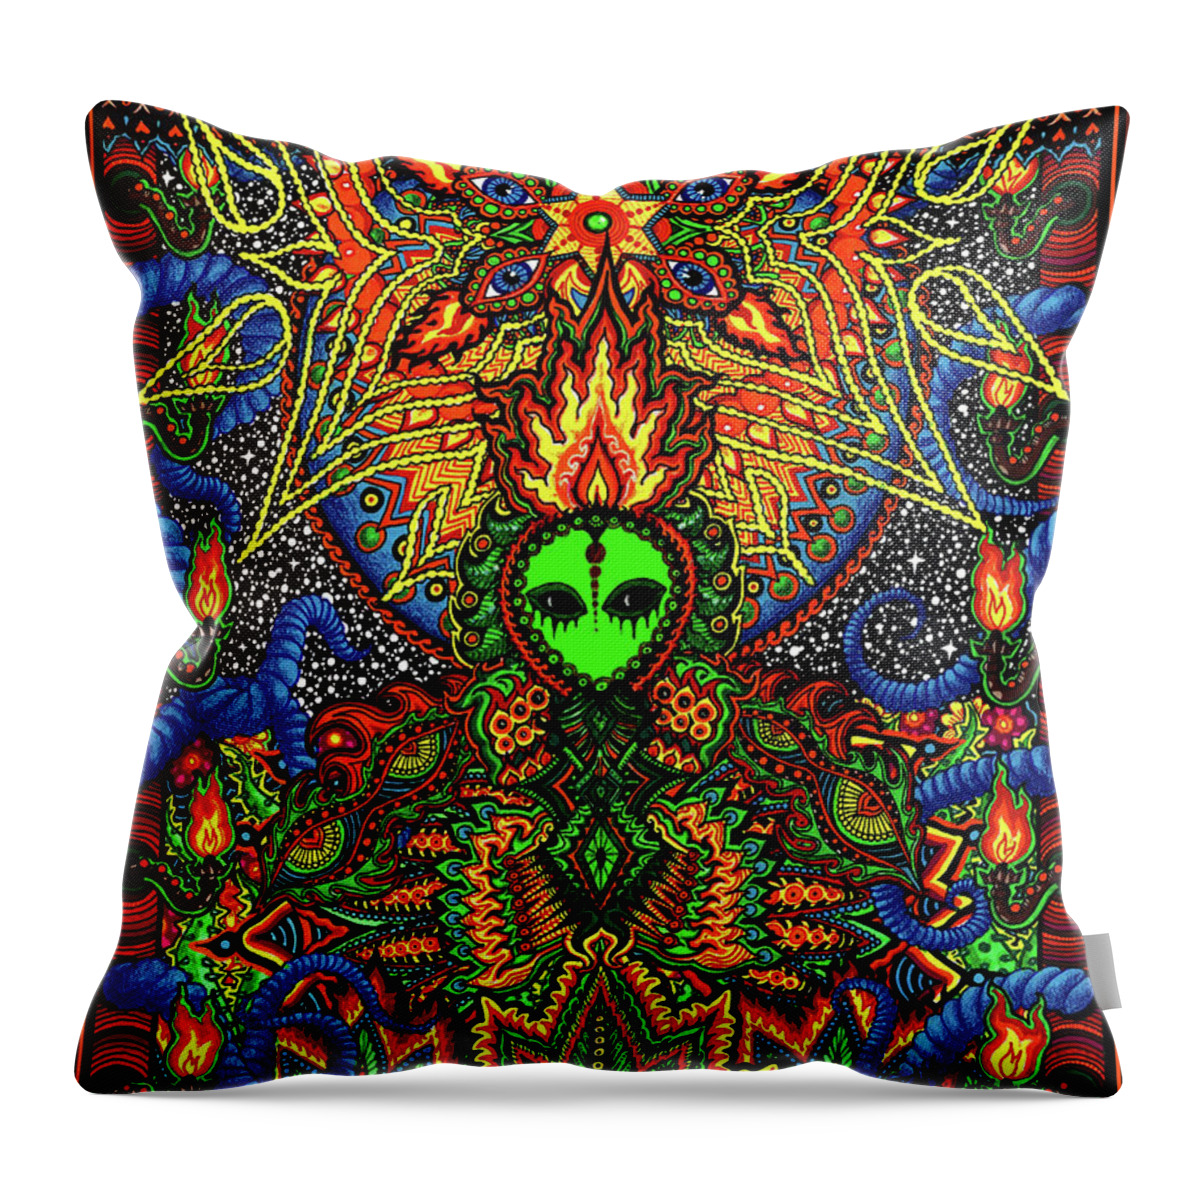 Alien Throw Pillow featuring the drawing How Do You Like It Here by Baruska A Michalcikova